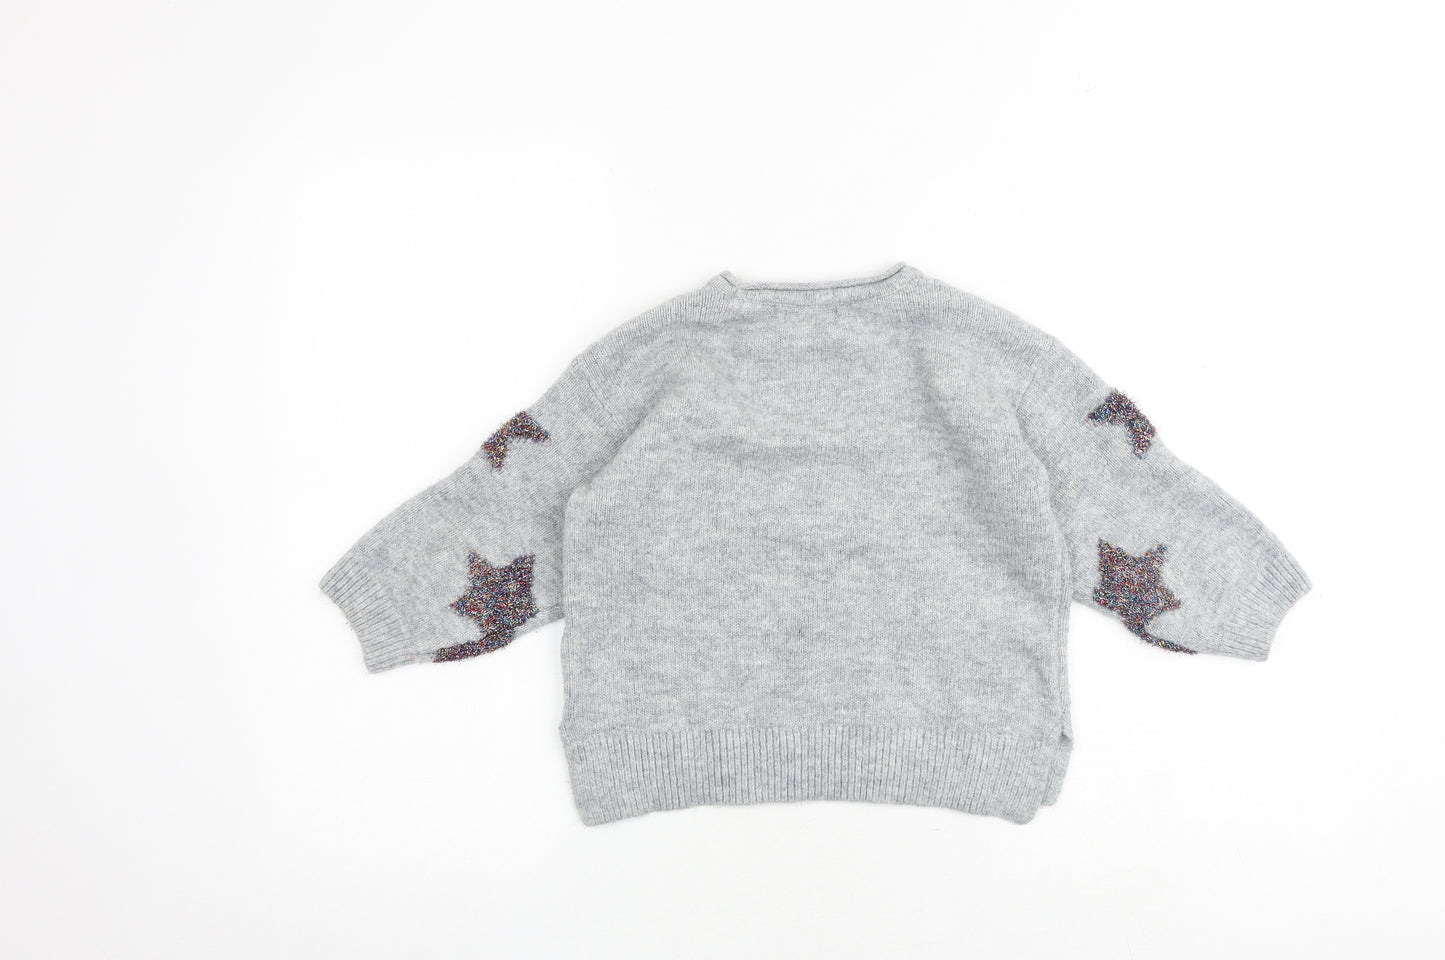 Marks and Spencer Girls Grey Round Neck Geometric Acrylic Pullover Jumper Size 5-6 Years Pullover - Star Pattern